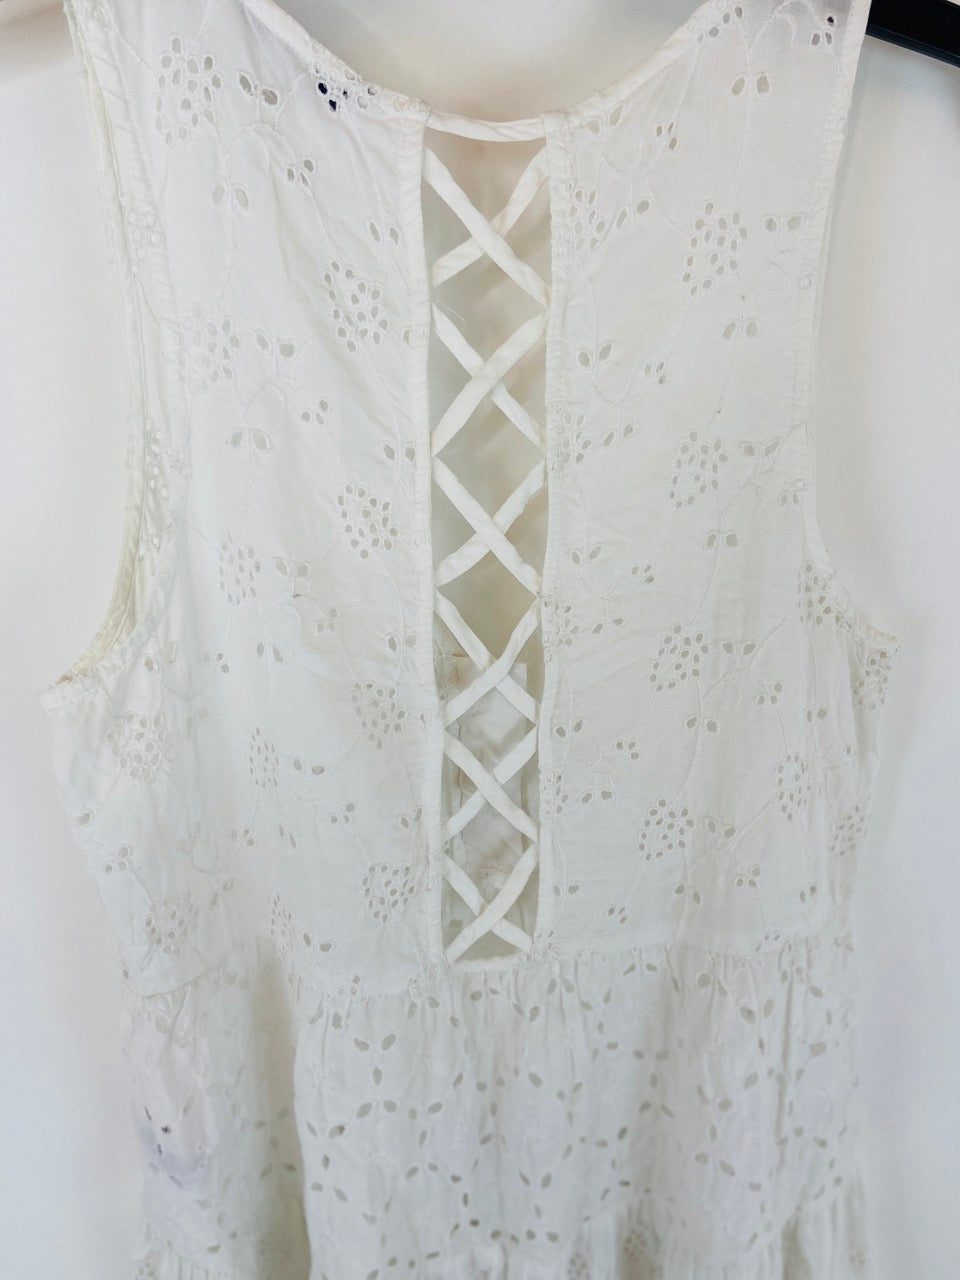 American Eagle Outfitters Lace Tank with Clasps on Front- S